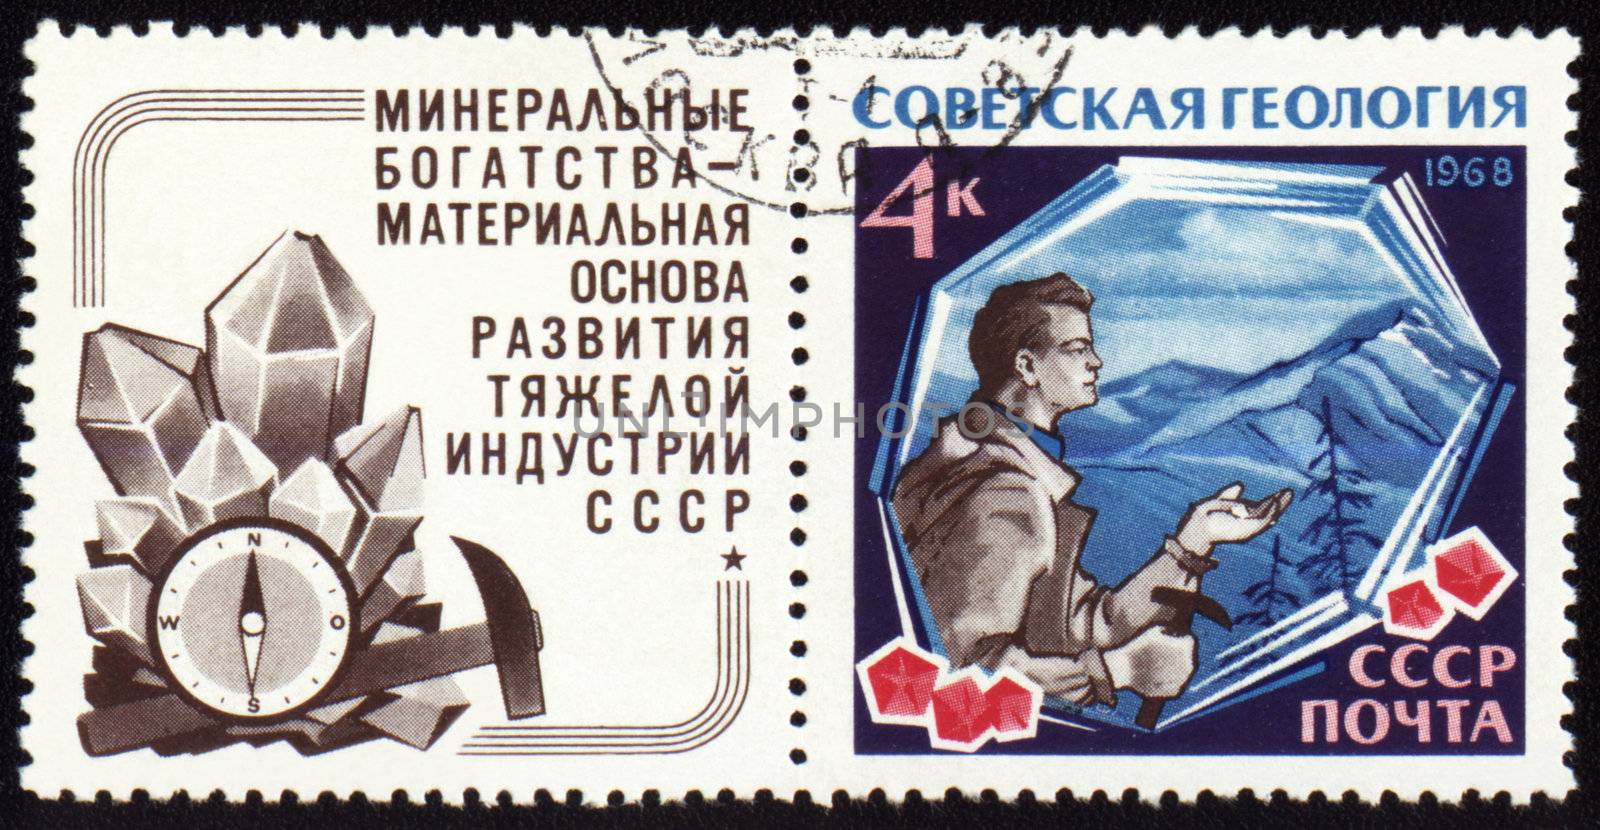 USSR - CIRCA 1968: A stamp printed in USSR, shows geologist on mountains background, devoted to russian geology, circa 1968